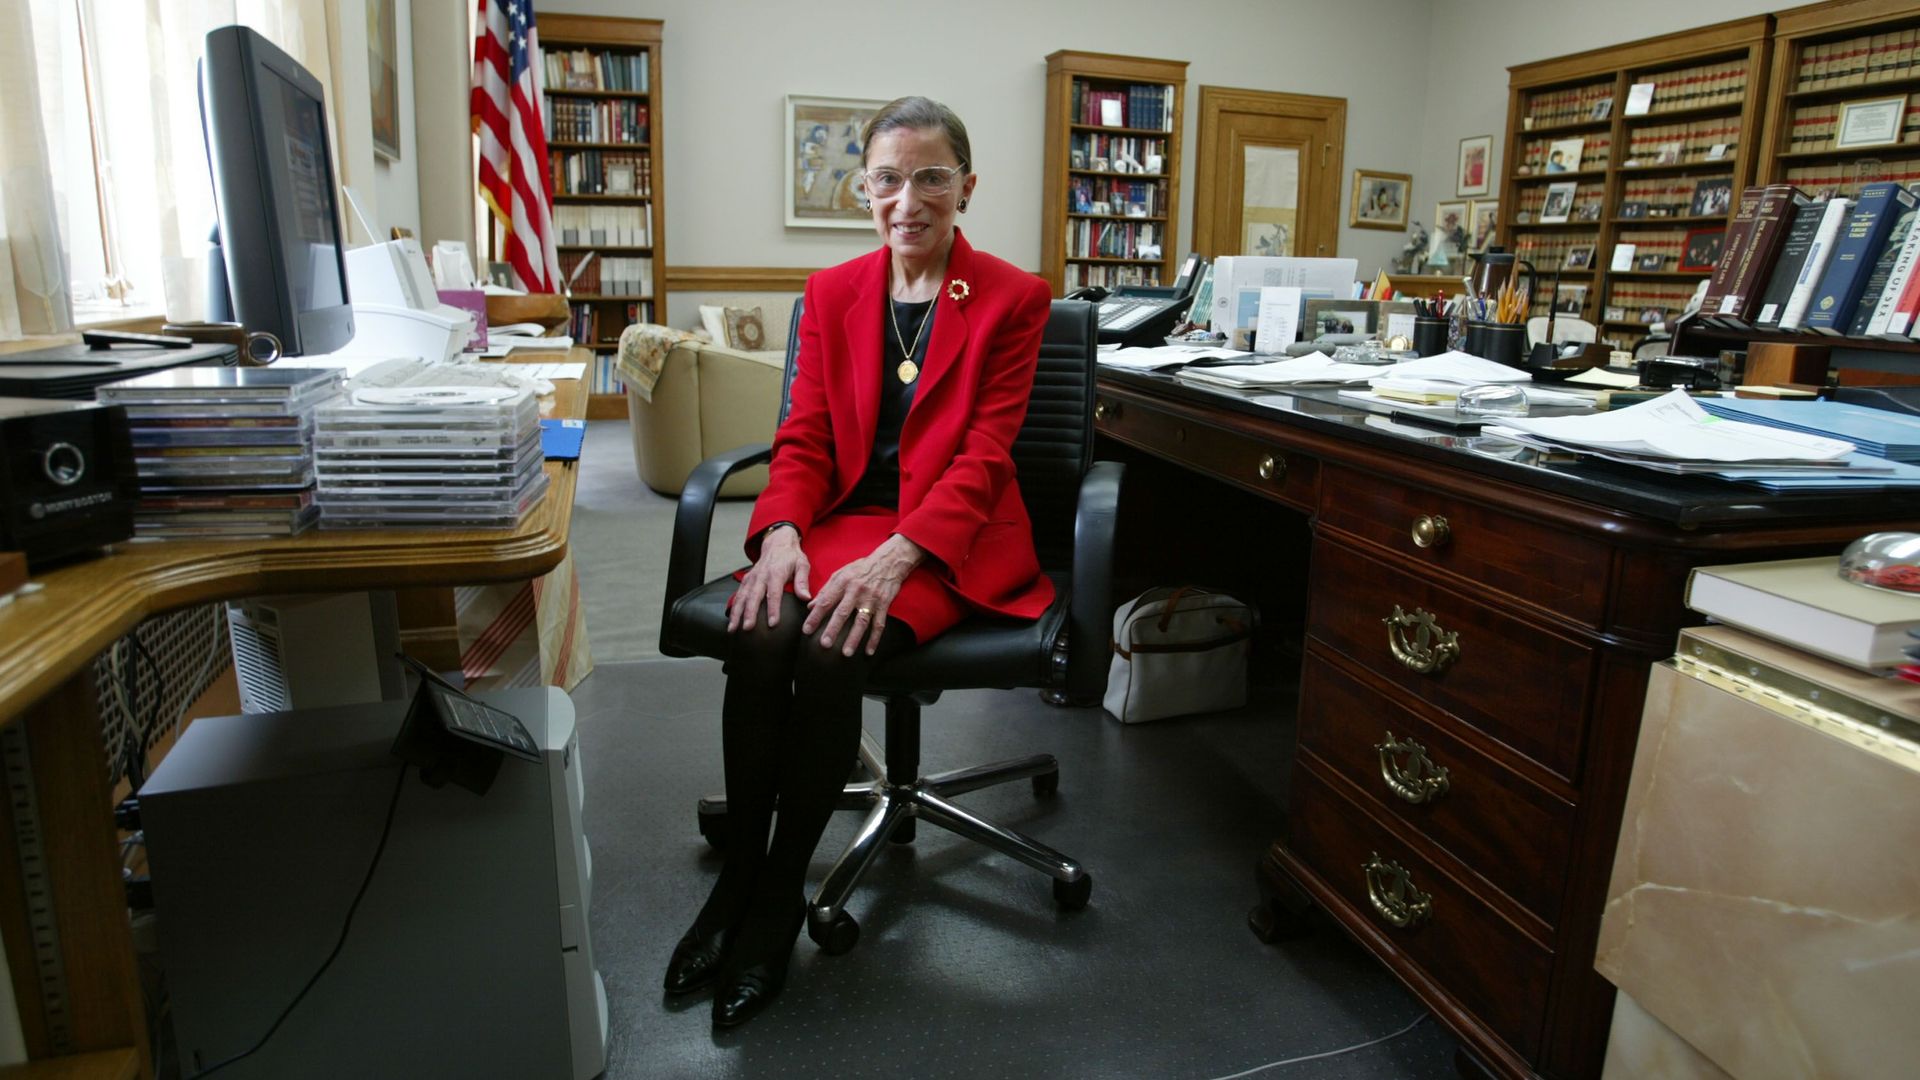 Justice Ginsburg sits in her chambers in 2002.